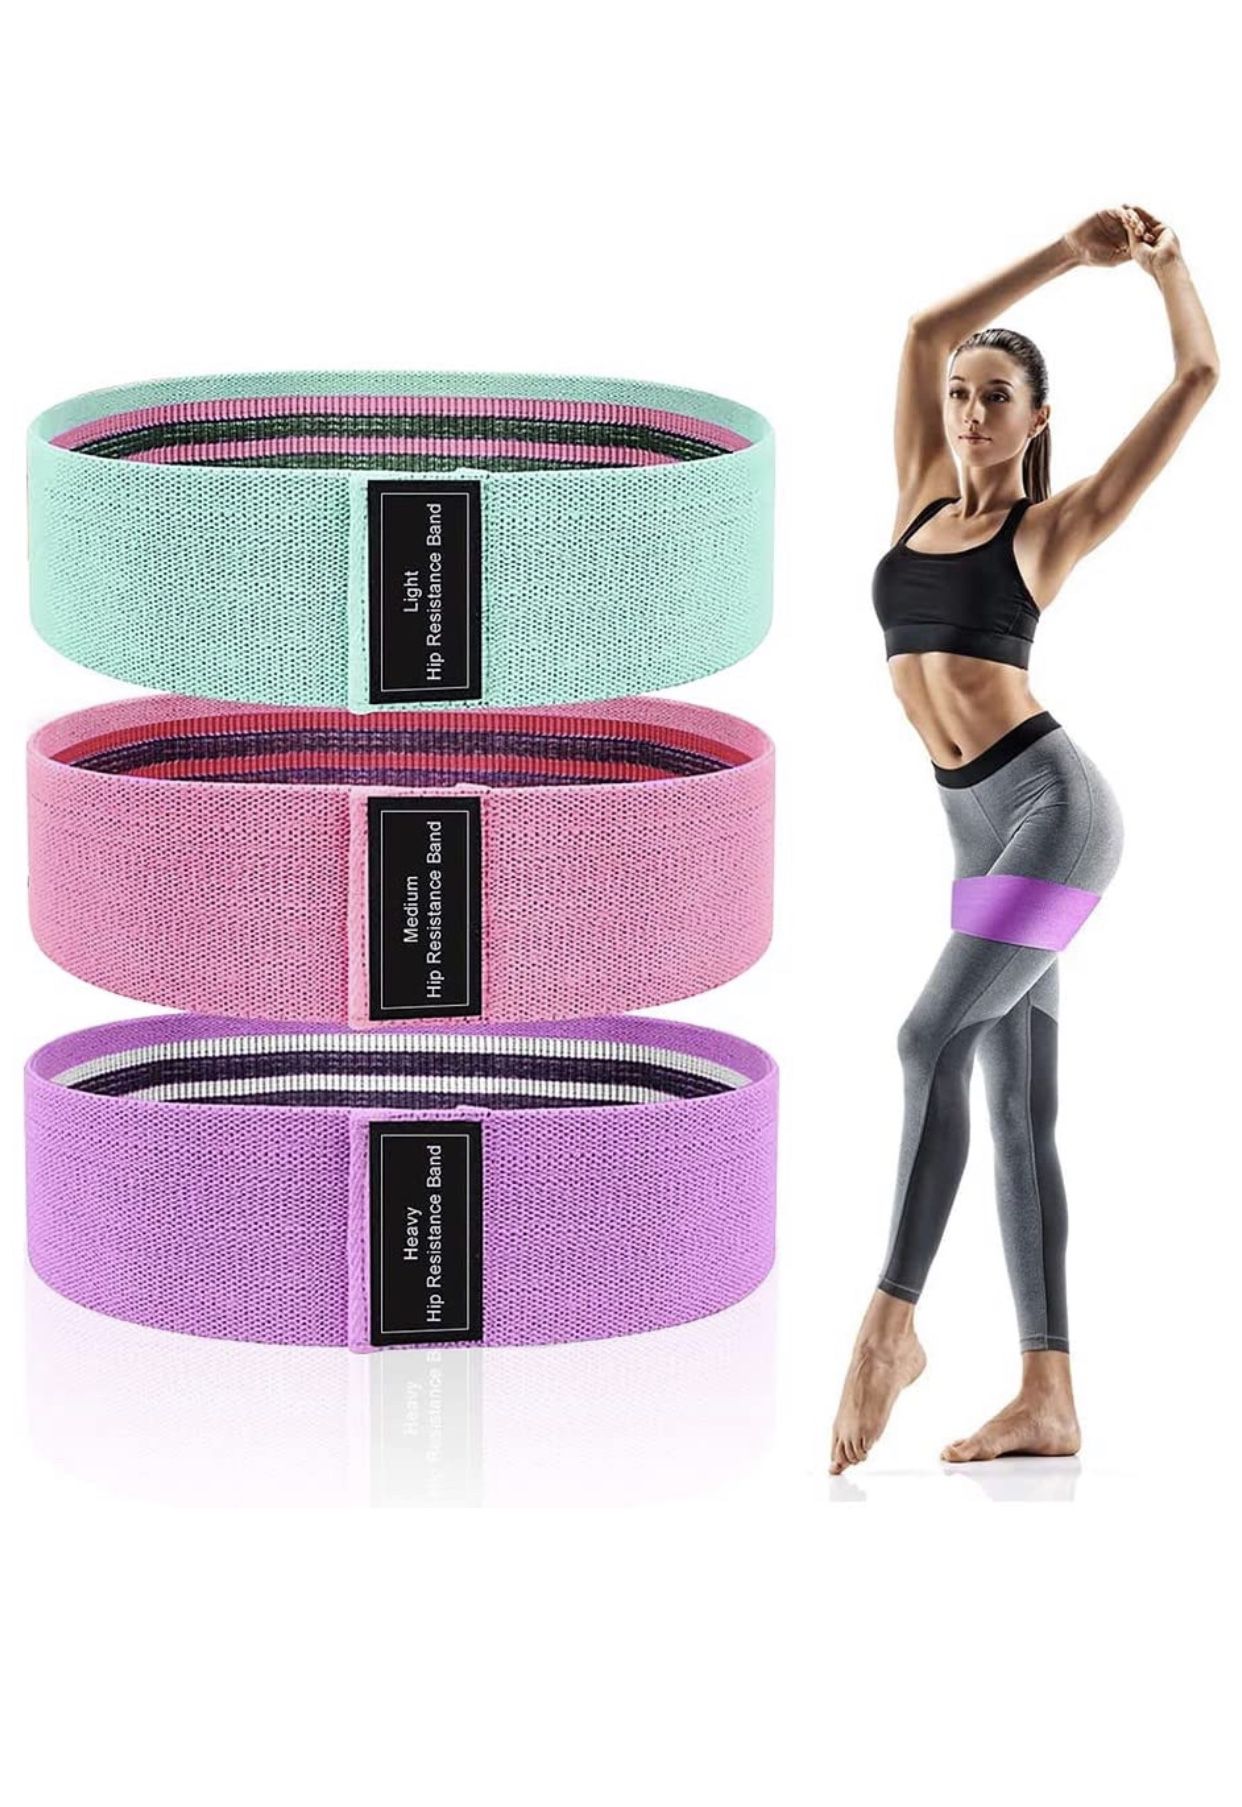 Resistance bands - new in pack